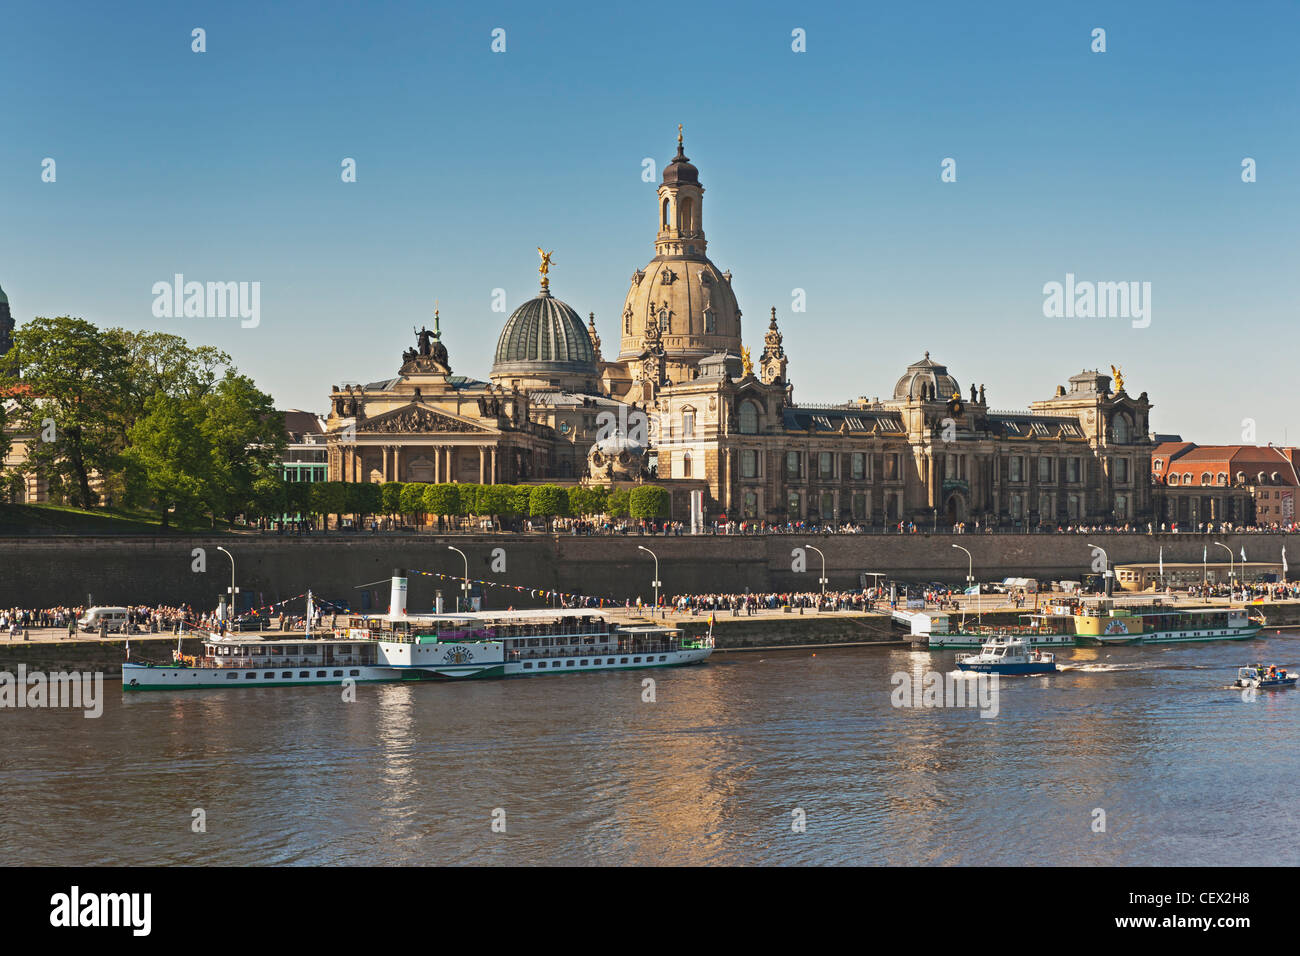 Fleet parade of historical paddle steamers, every year on 1 May, on the Elbe River in front of the old town of  Dresden, Germany Stock Photo